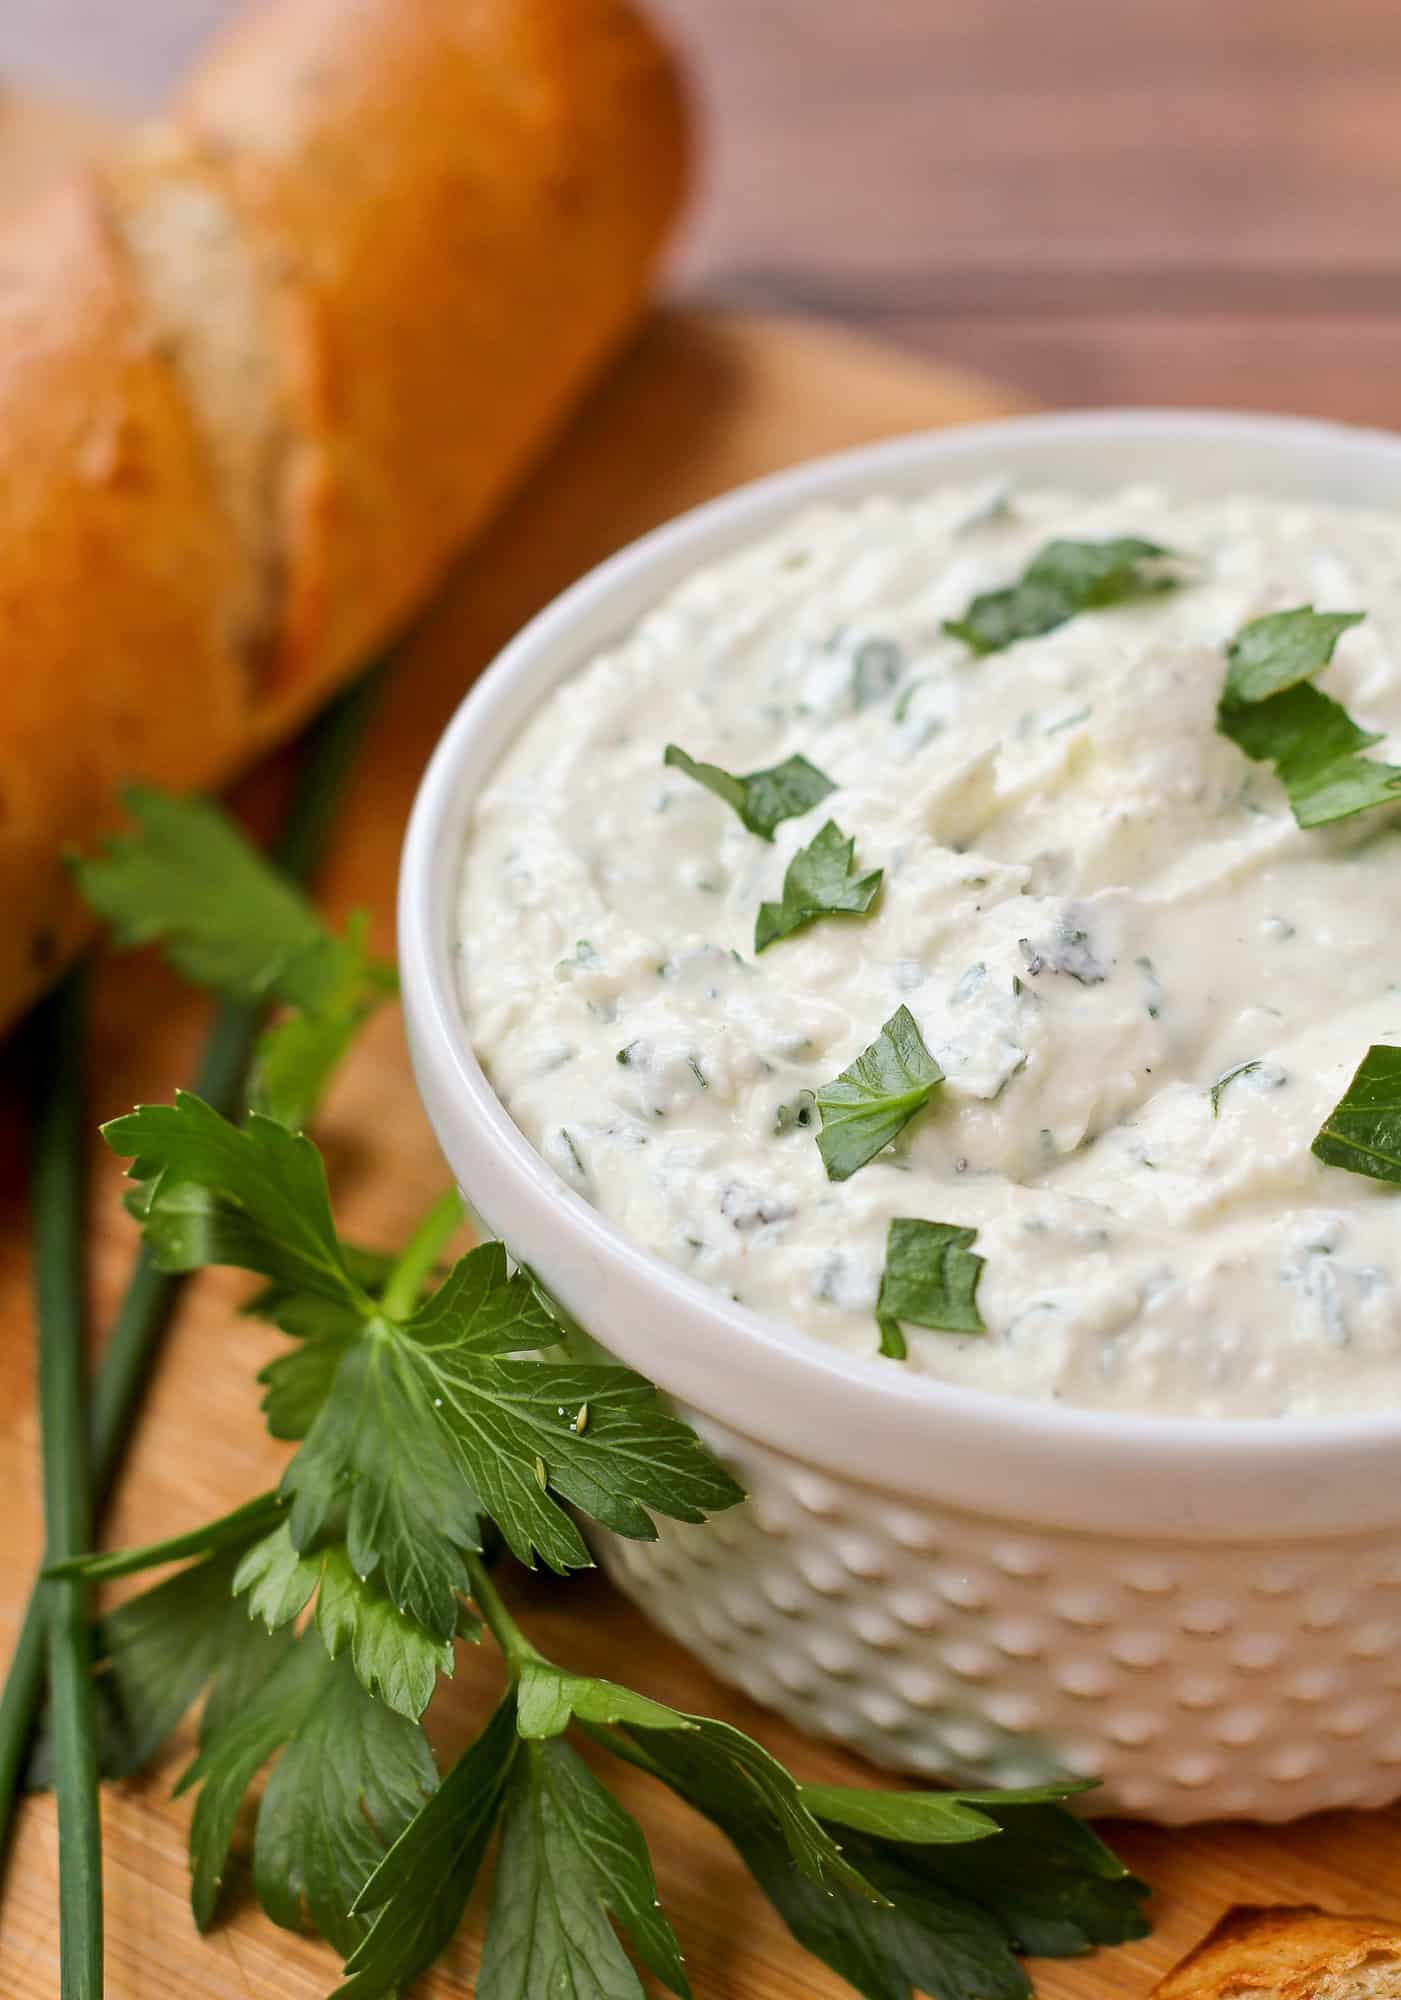 Feta dip with herbs in a small white bowl.